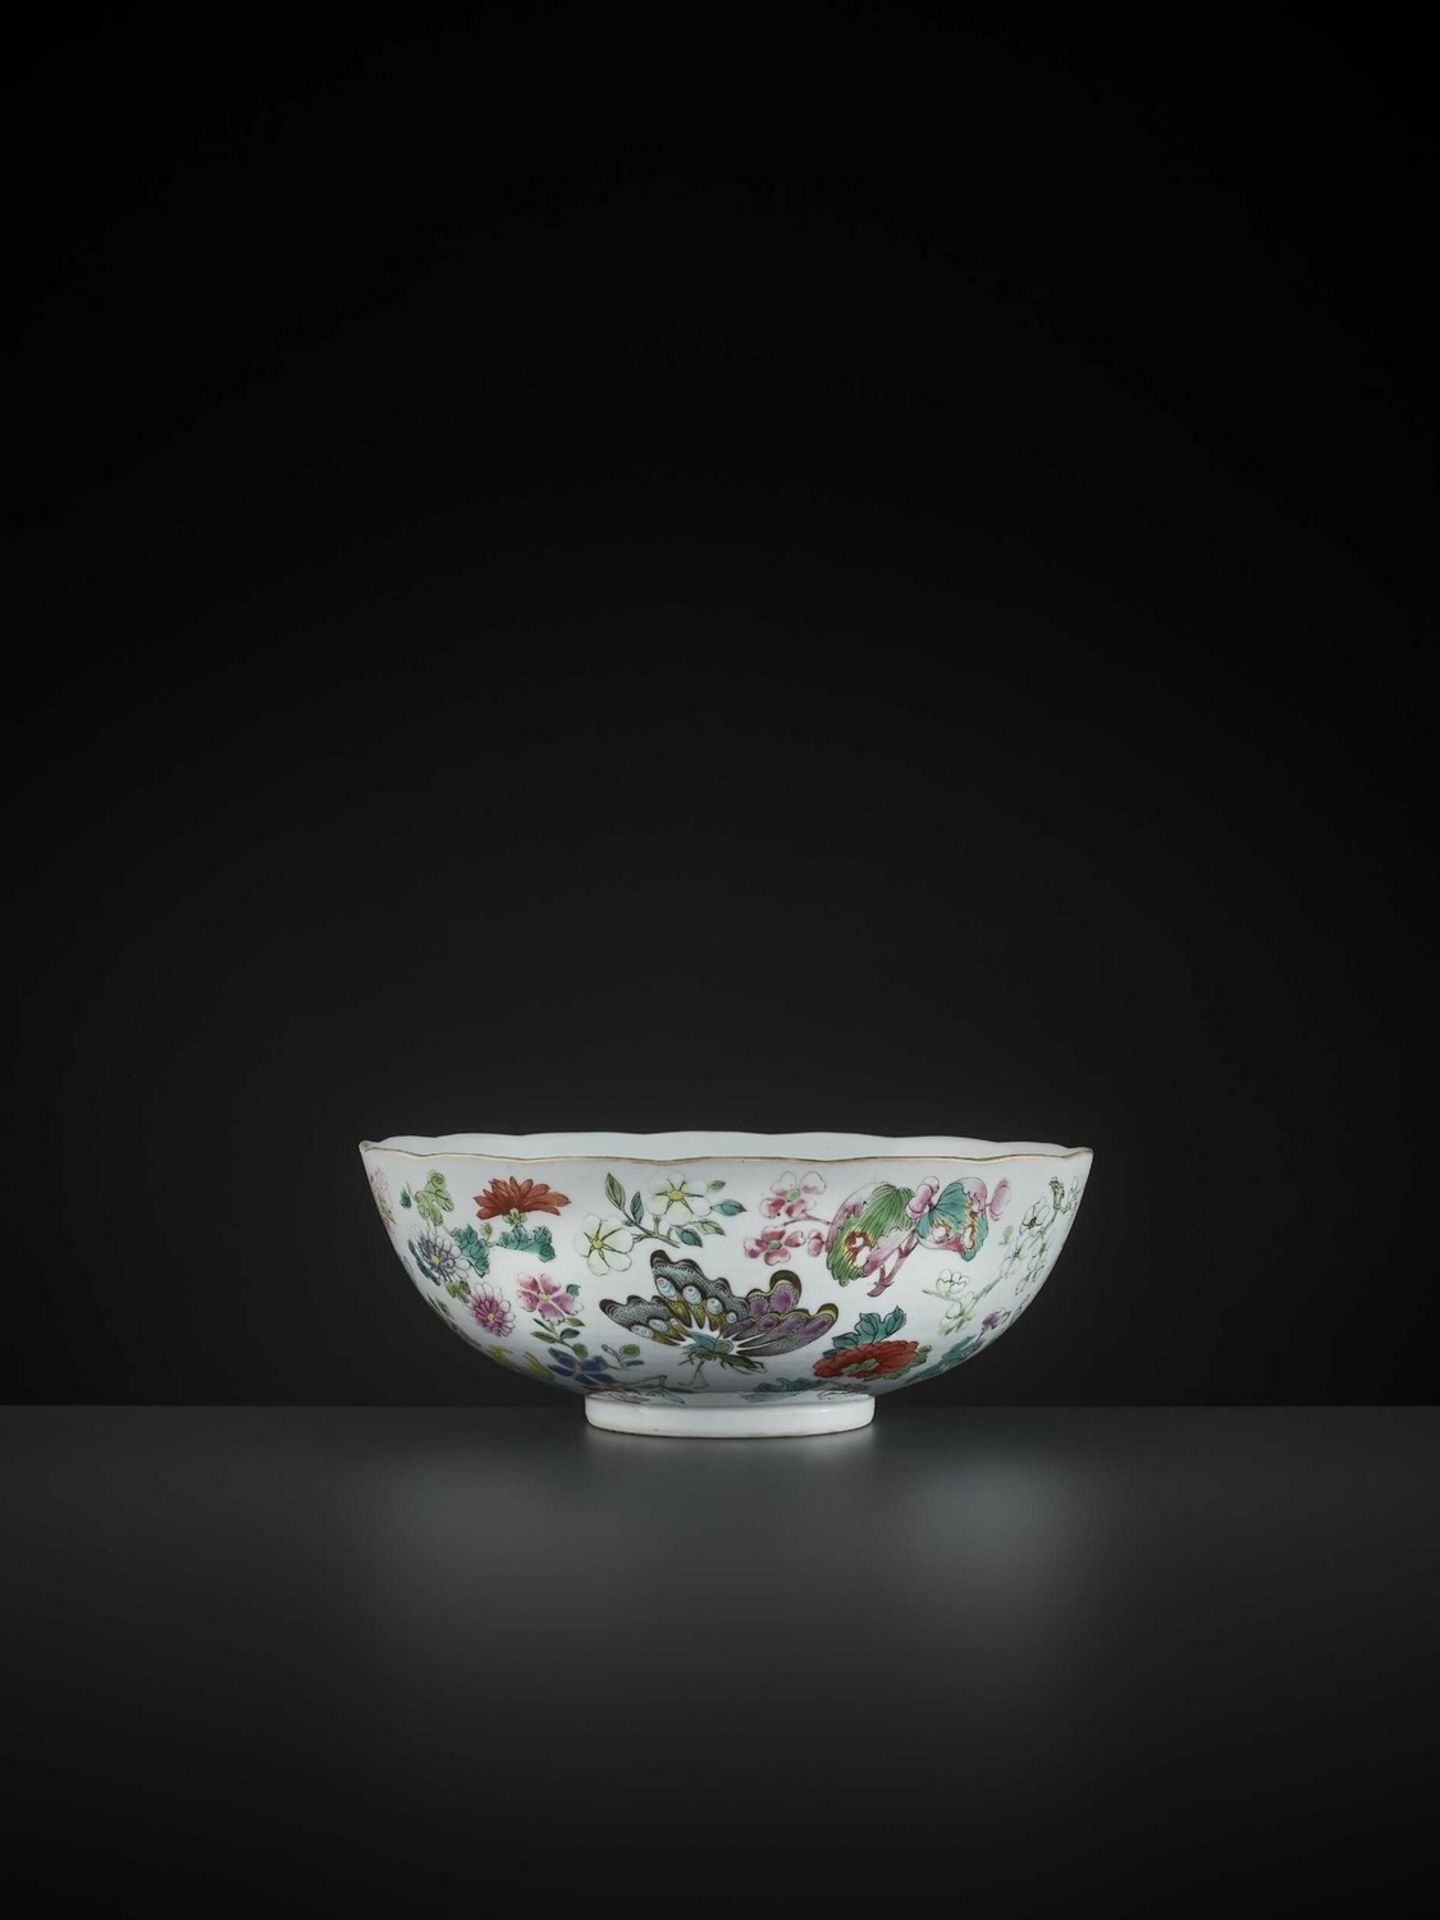 A LARGE BUTTERFLY BOWL, DAOGUANG MARK AND PERIOD